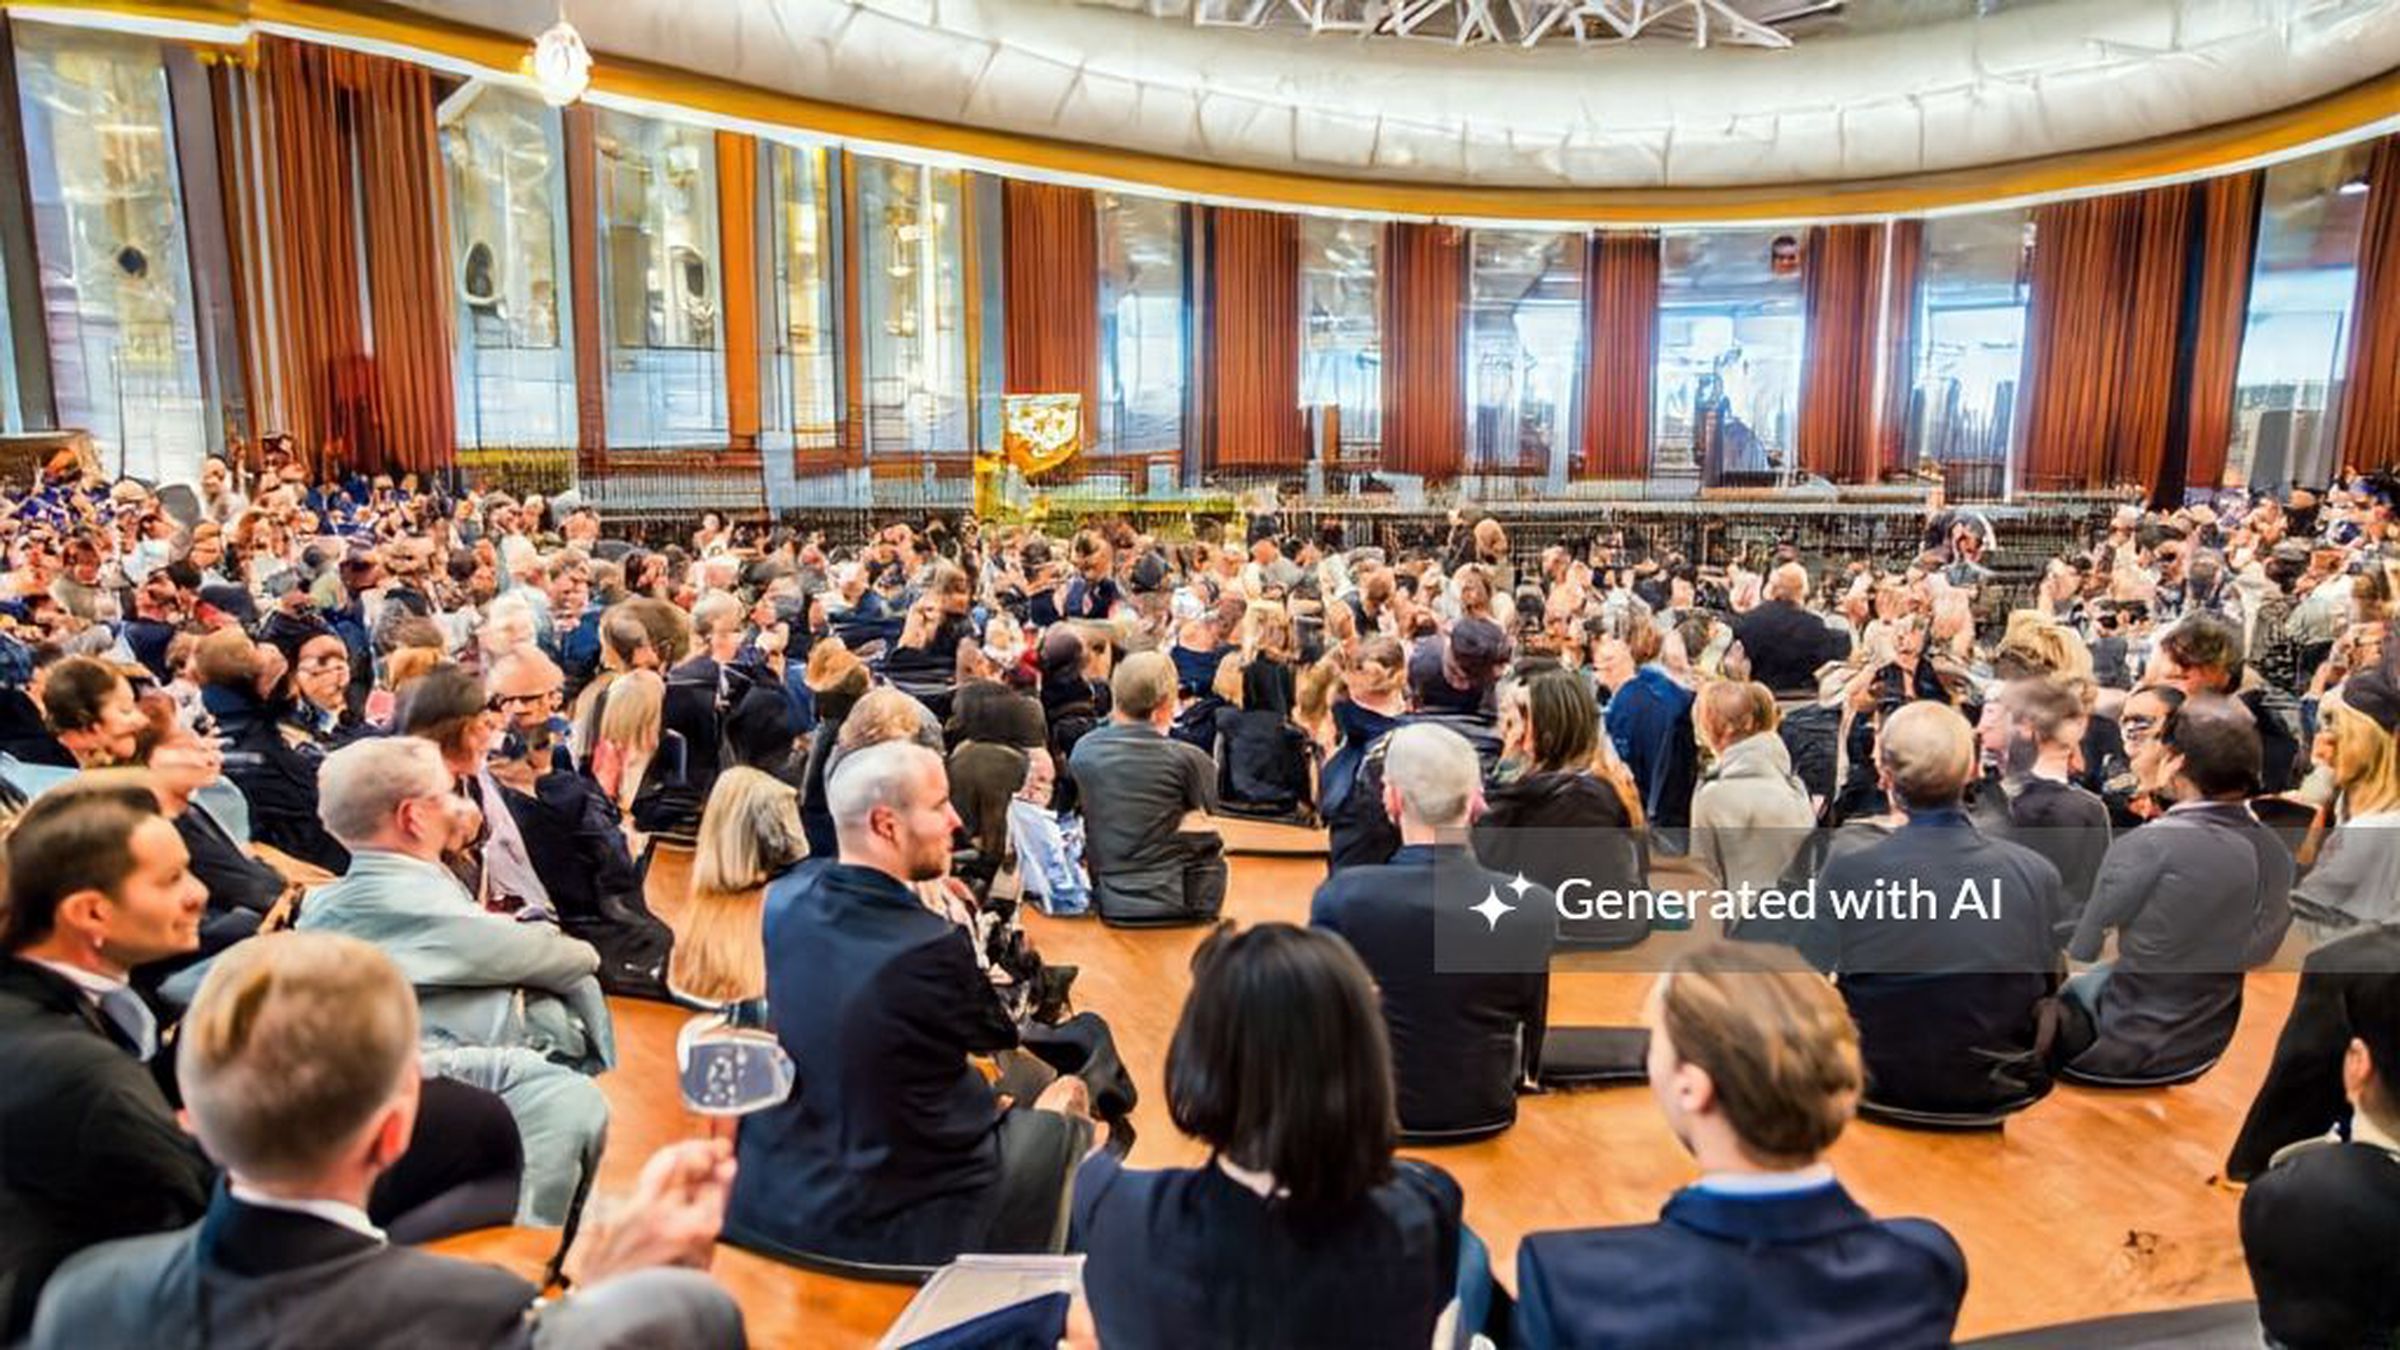 An AI-generated photo showing a large crowd of people in business suits sitting in a large circle on the wooden floor of a round ballroom.